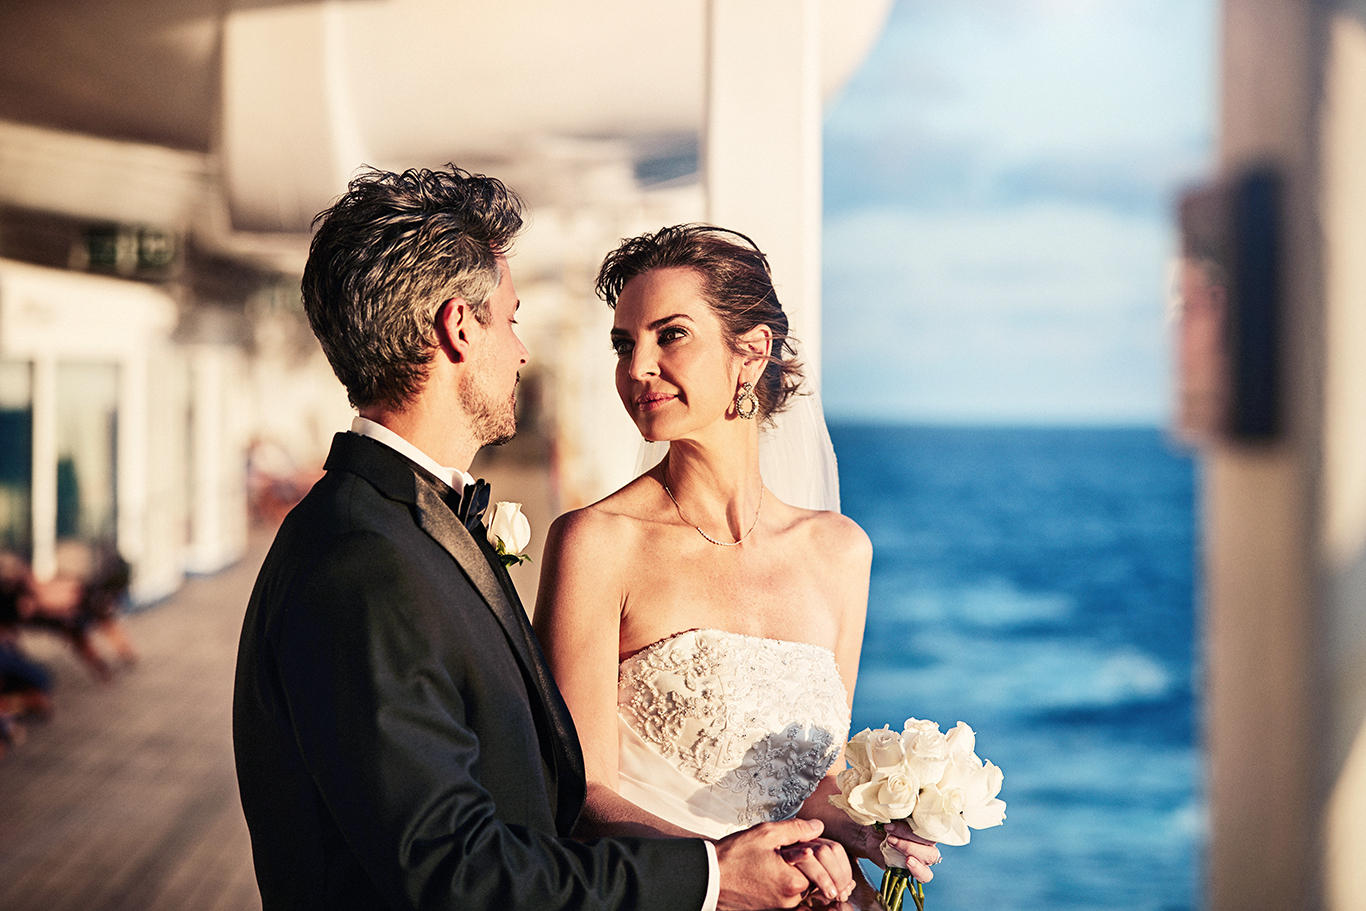 cruise ship marriage requirements